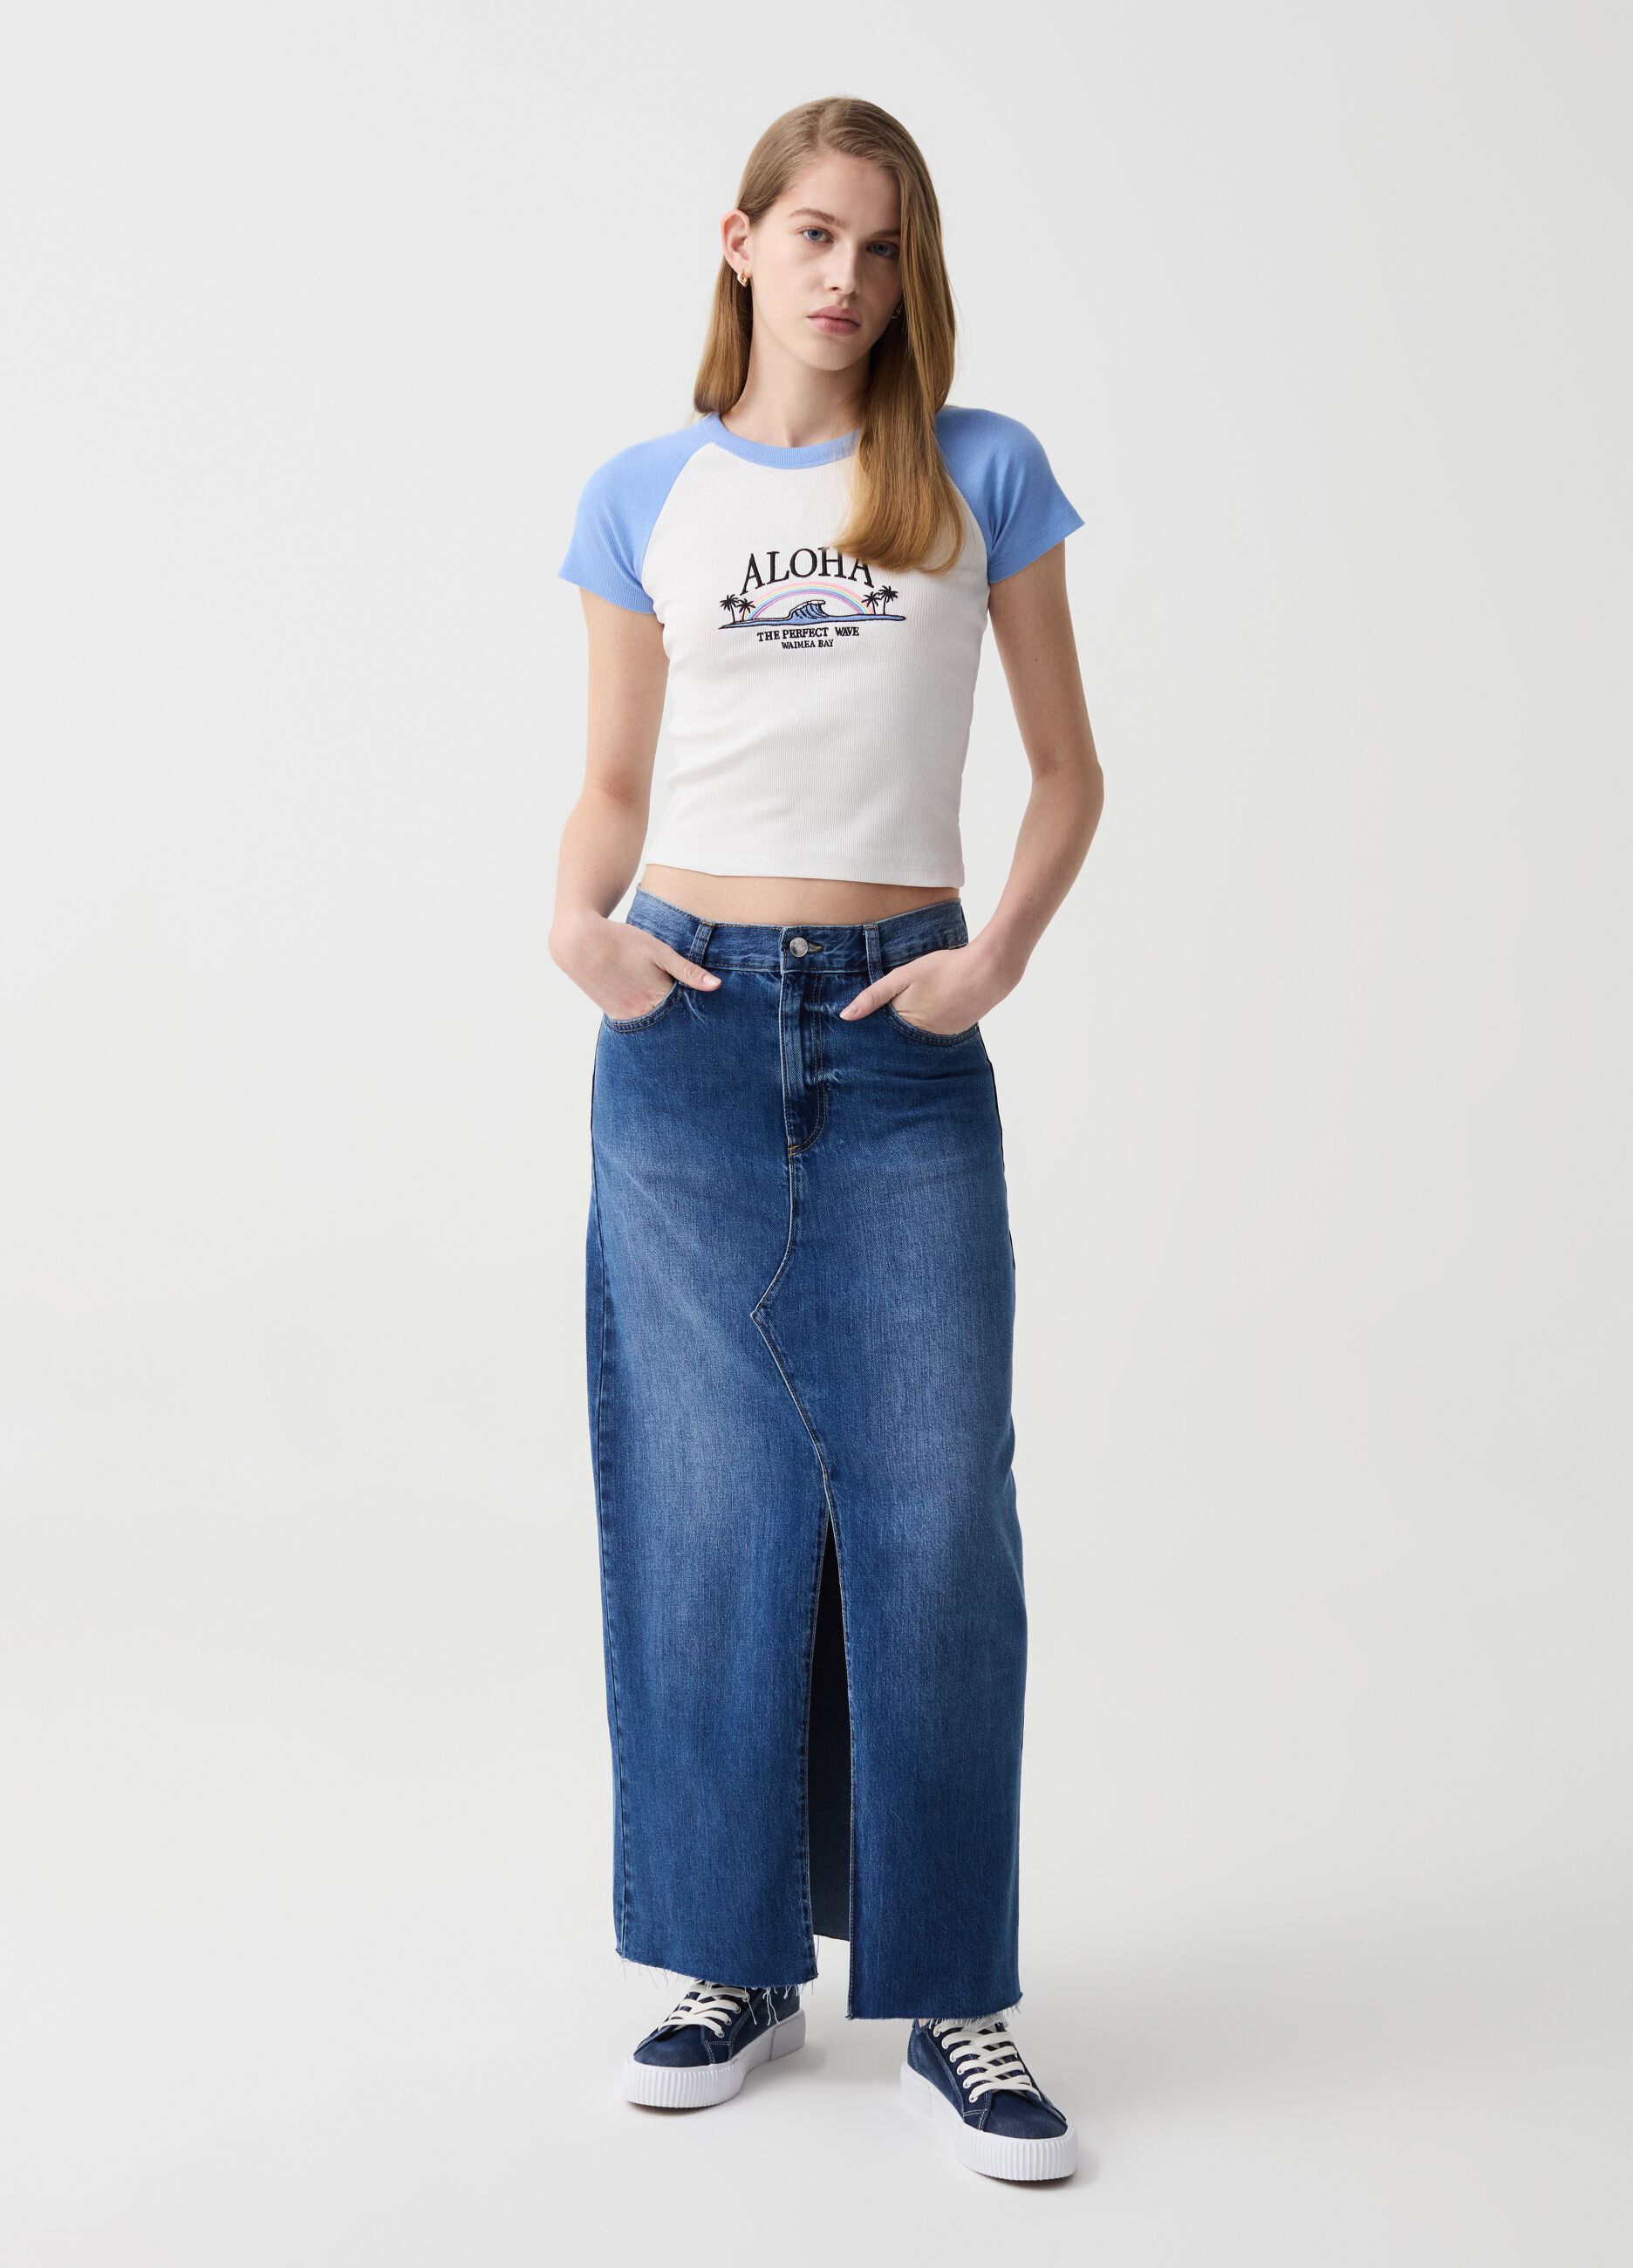 Long skirt in denim with raw edging